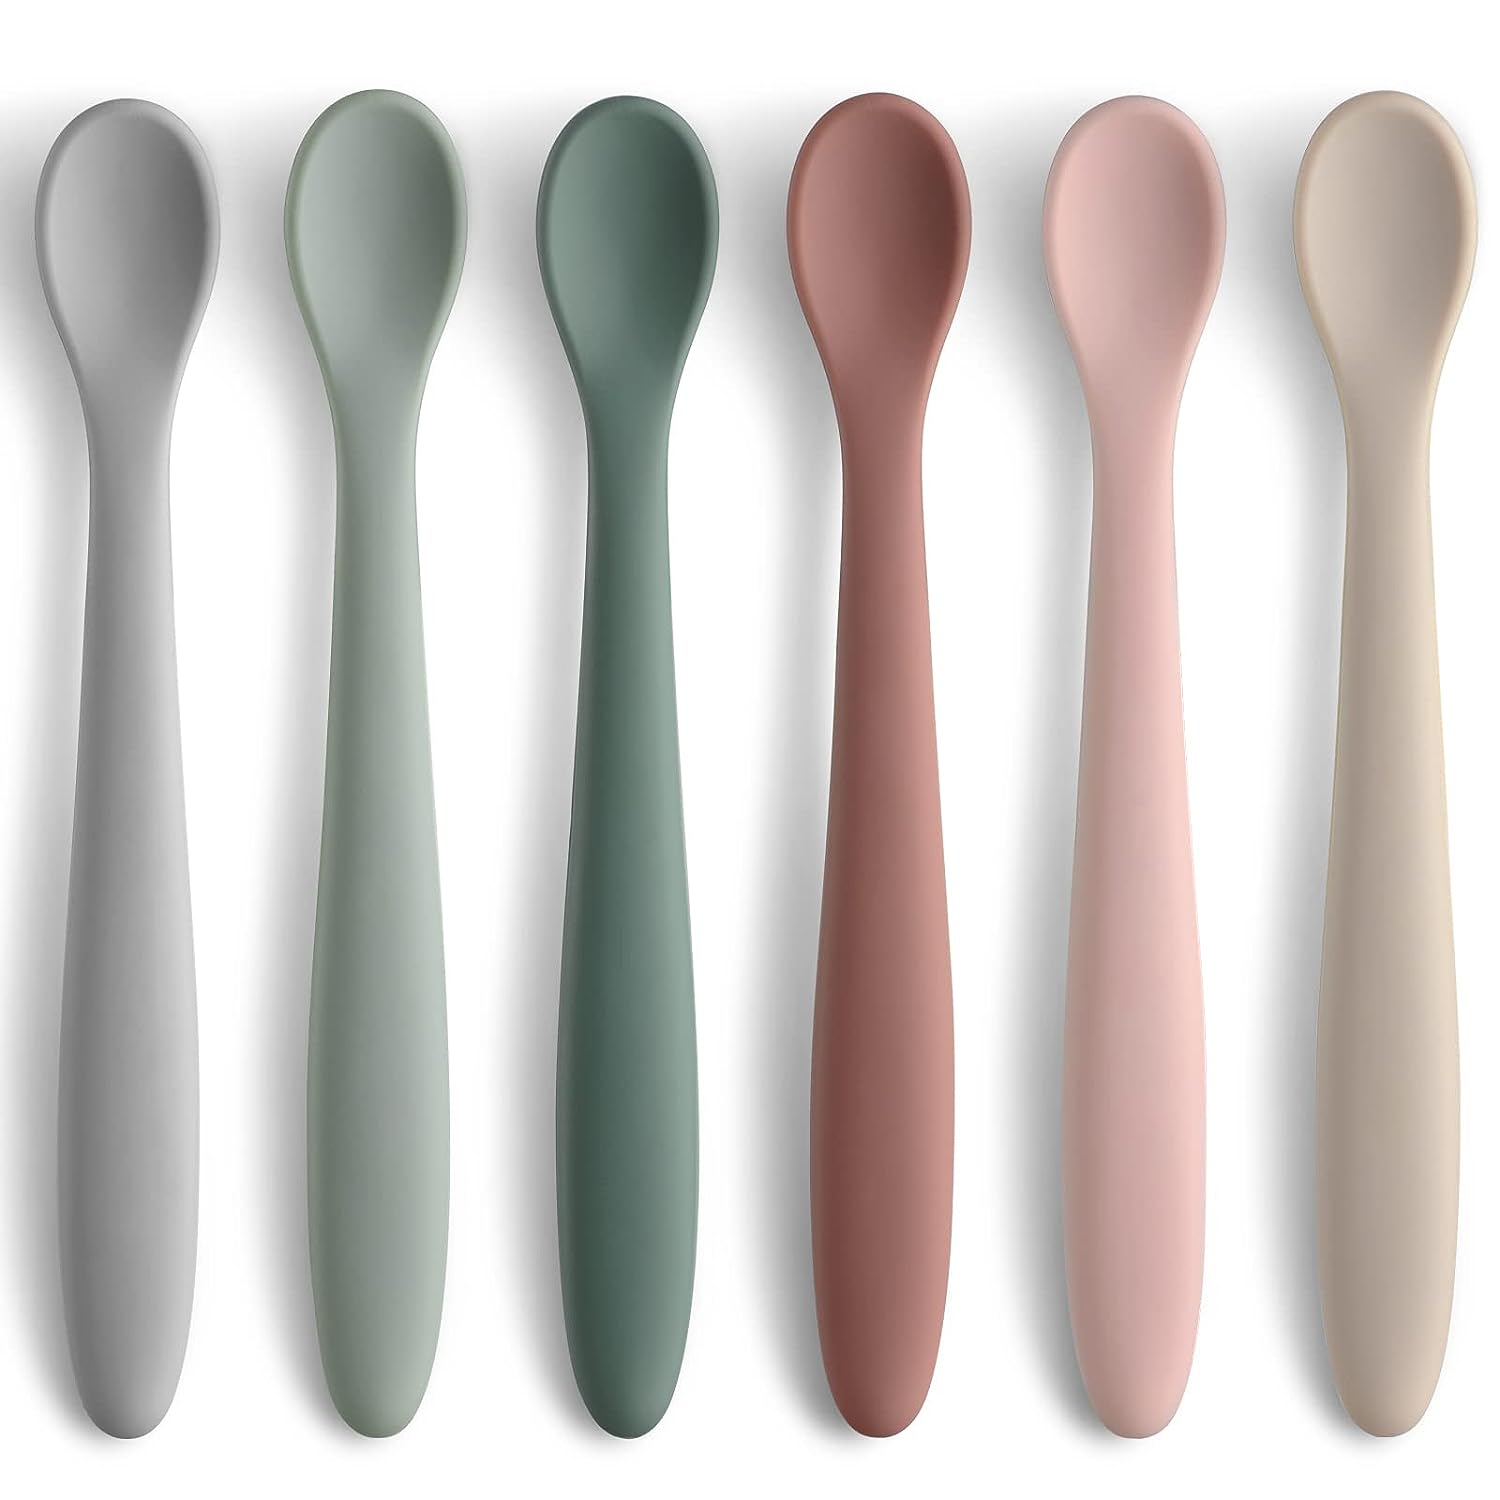 Review: Soft Silicone Baby Spoons - A Gentle Feeding Solution